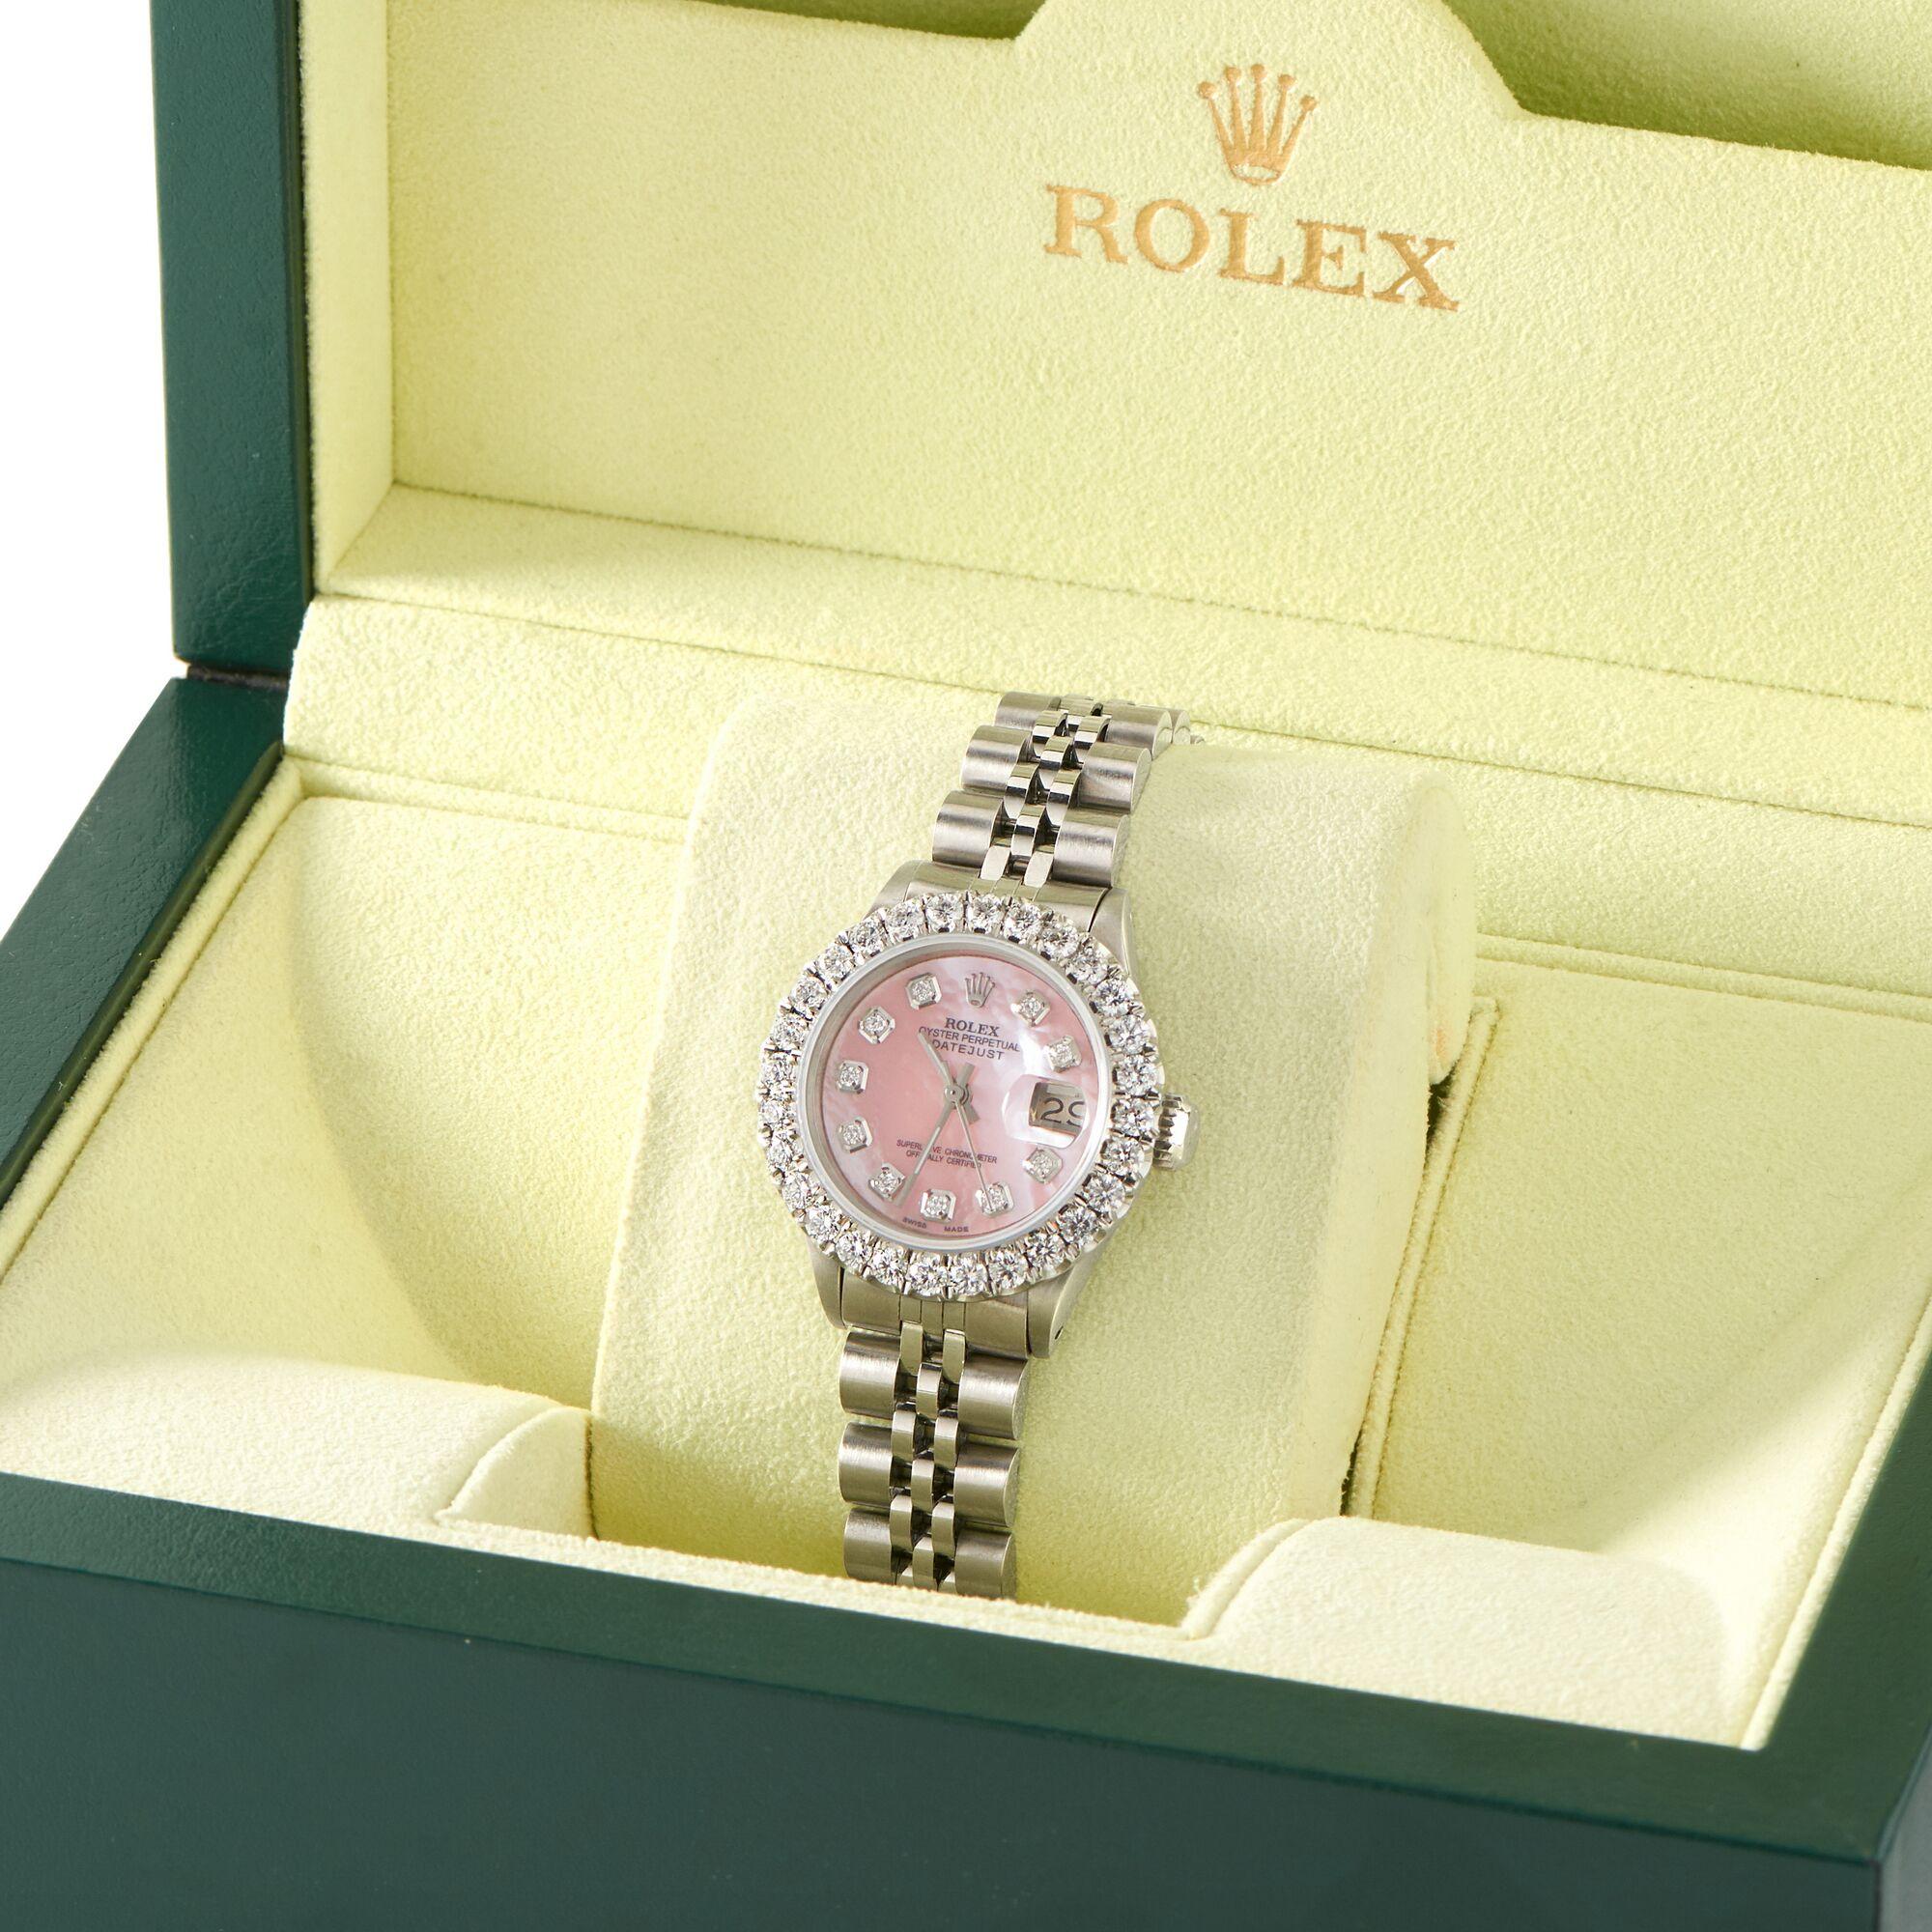 Rolex Datejust Steel Jubilee Watch 2 Carat Diamond Bezel / Vibrant Pink Dial In Excellent Condition For Sale In New York, NY